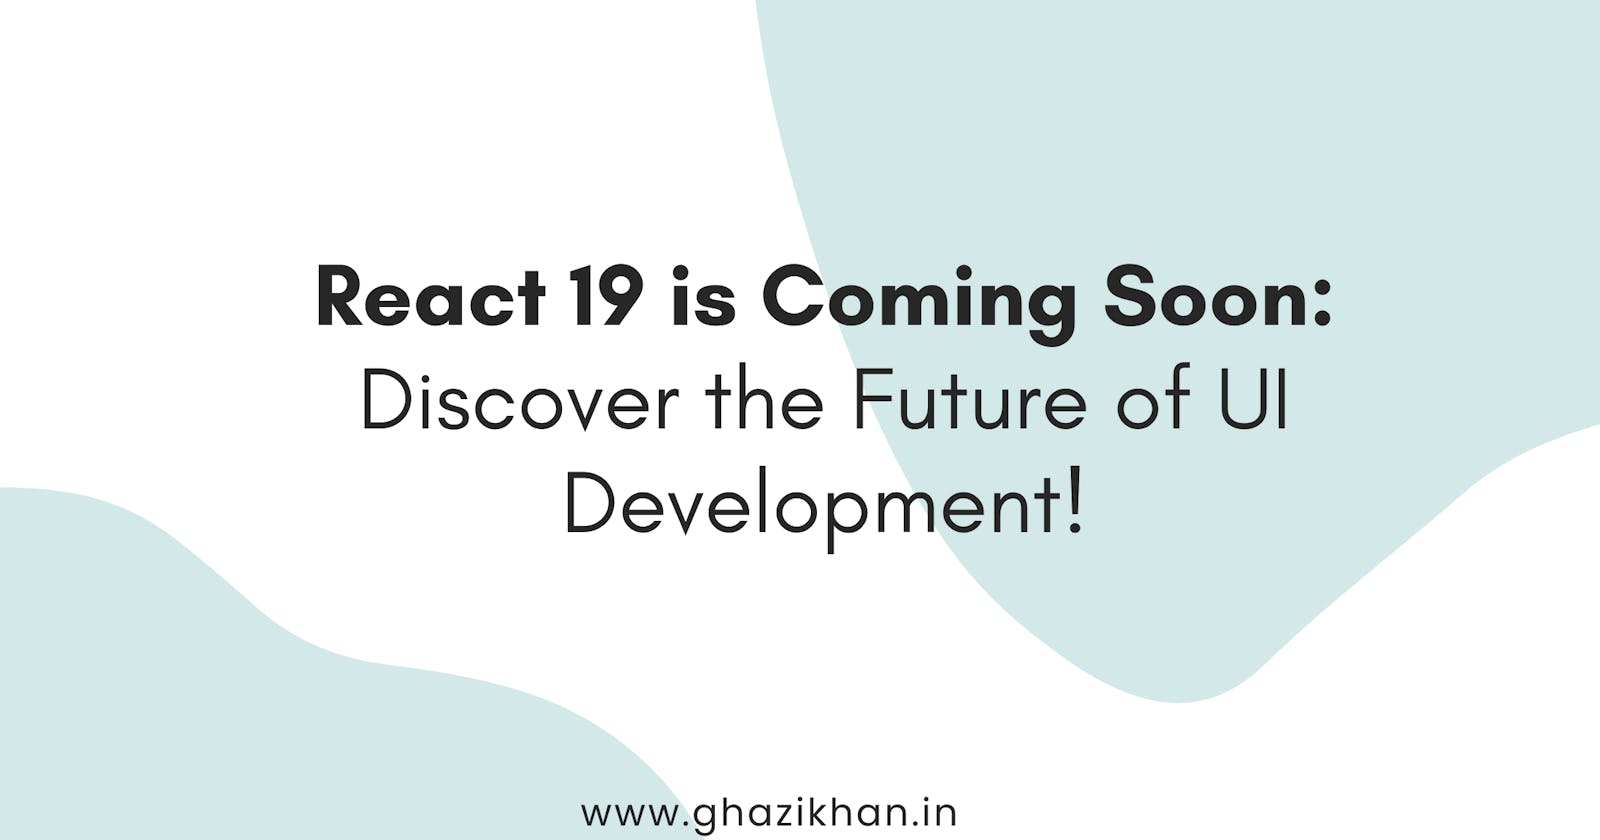 React 19 is Coming Soon: Discover the Future of UI Development!